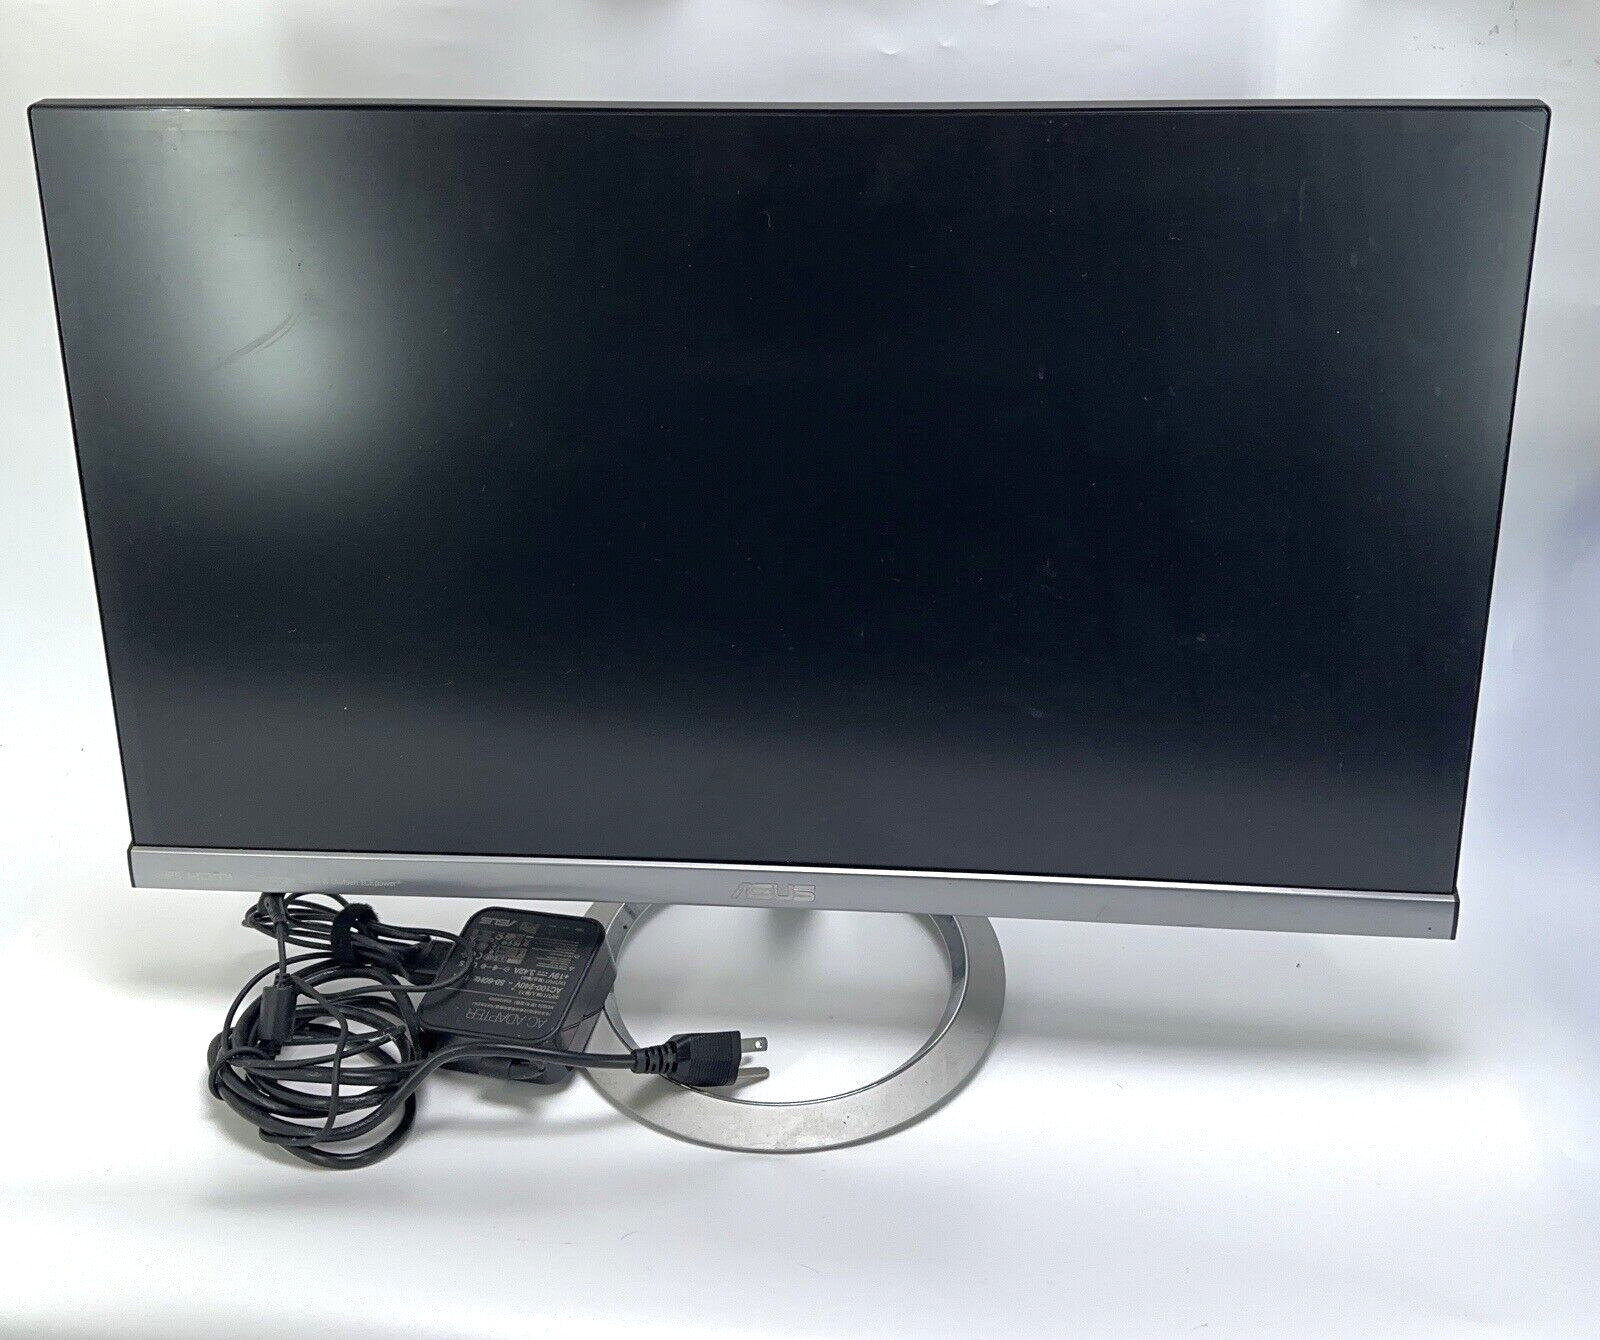 ASUS MX279H LED LCD Widescreen Monitor - Black/Silver - AS IS FOR PARTS